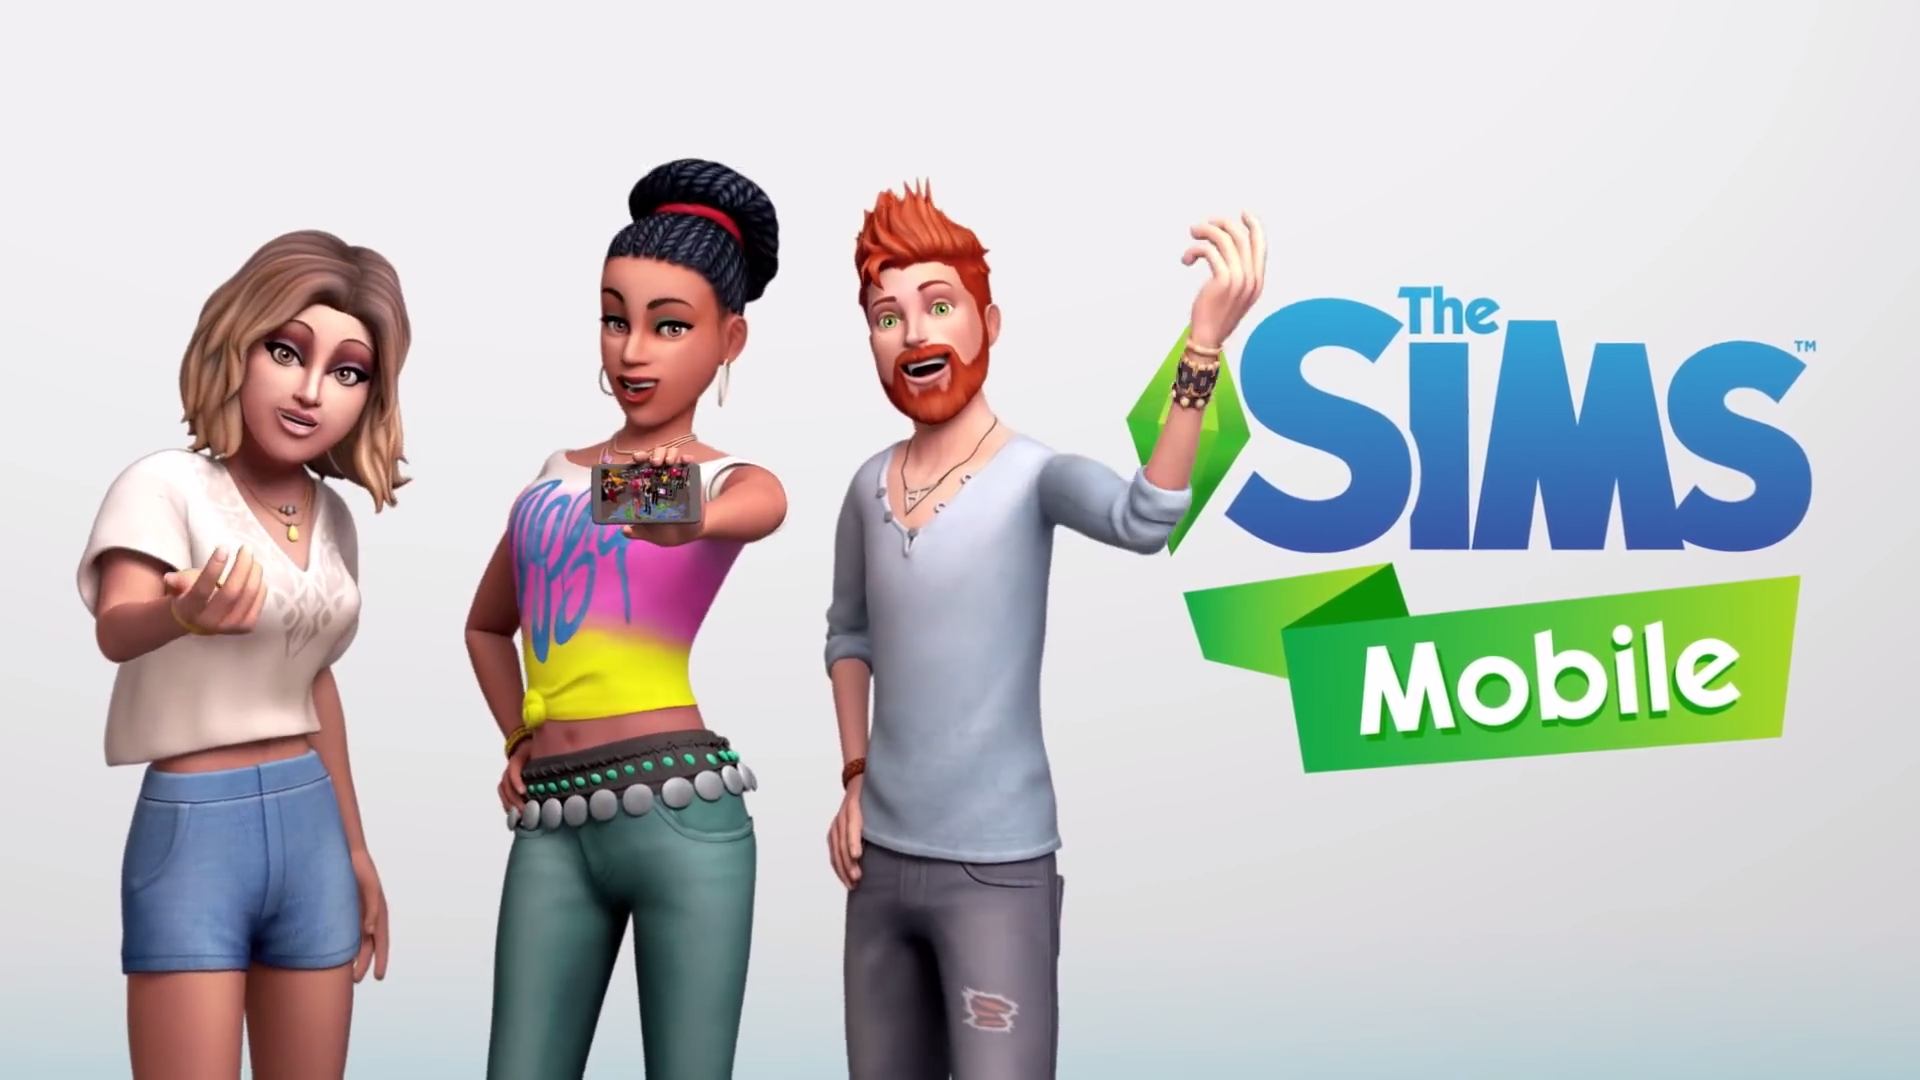 The Sims Mobile! The Sims Mobil Hileli Mod